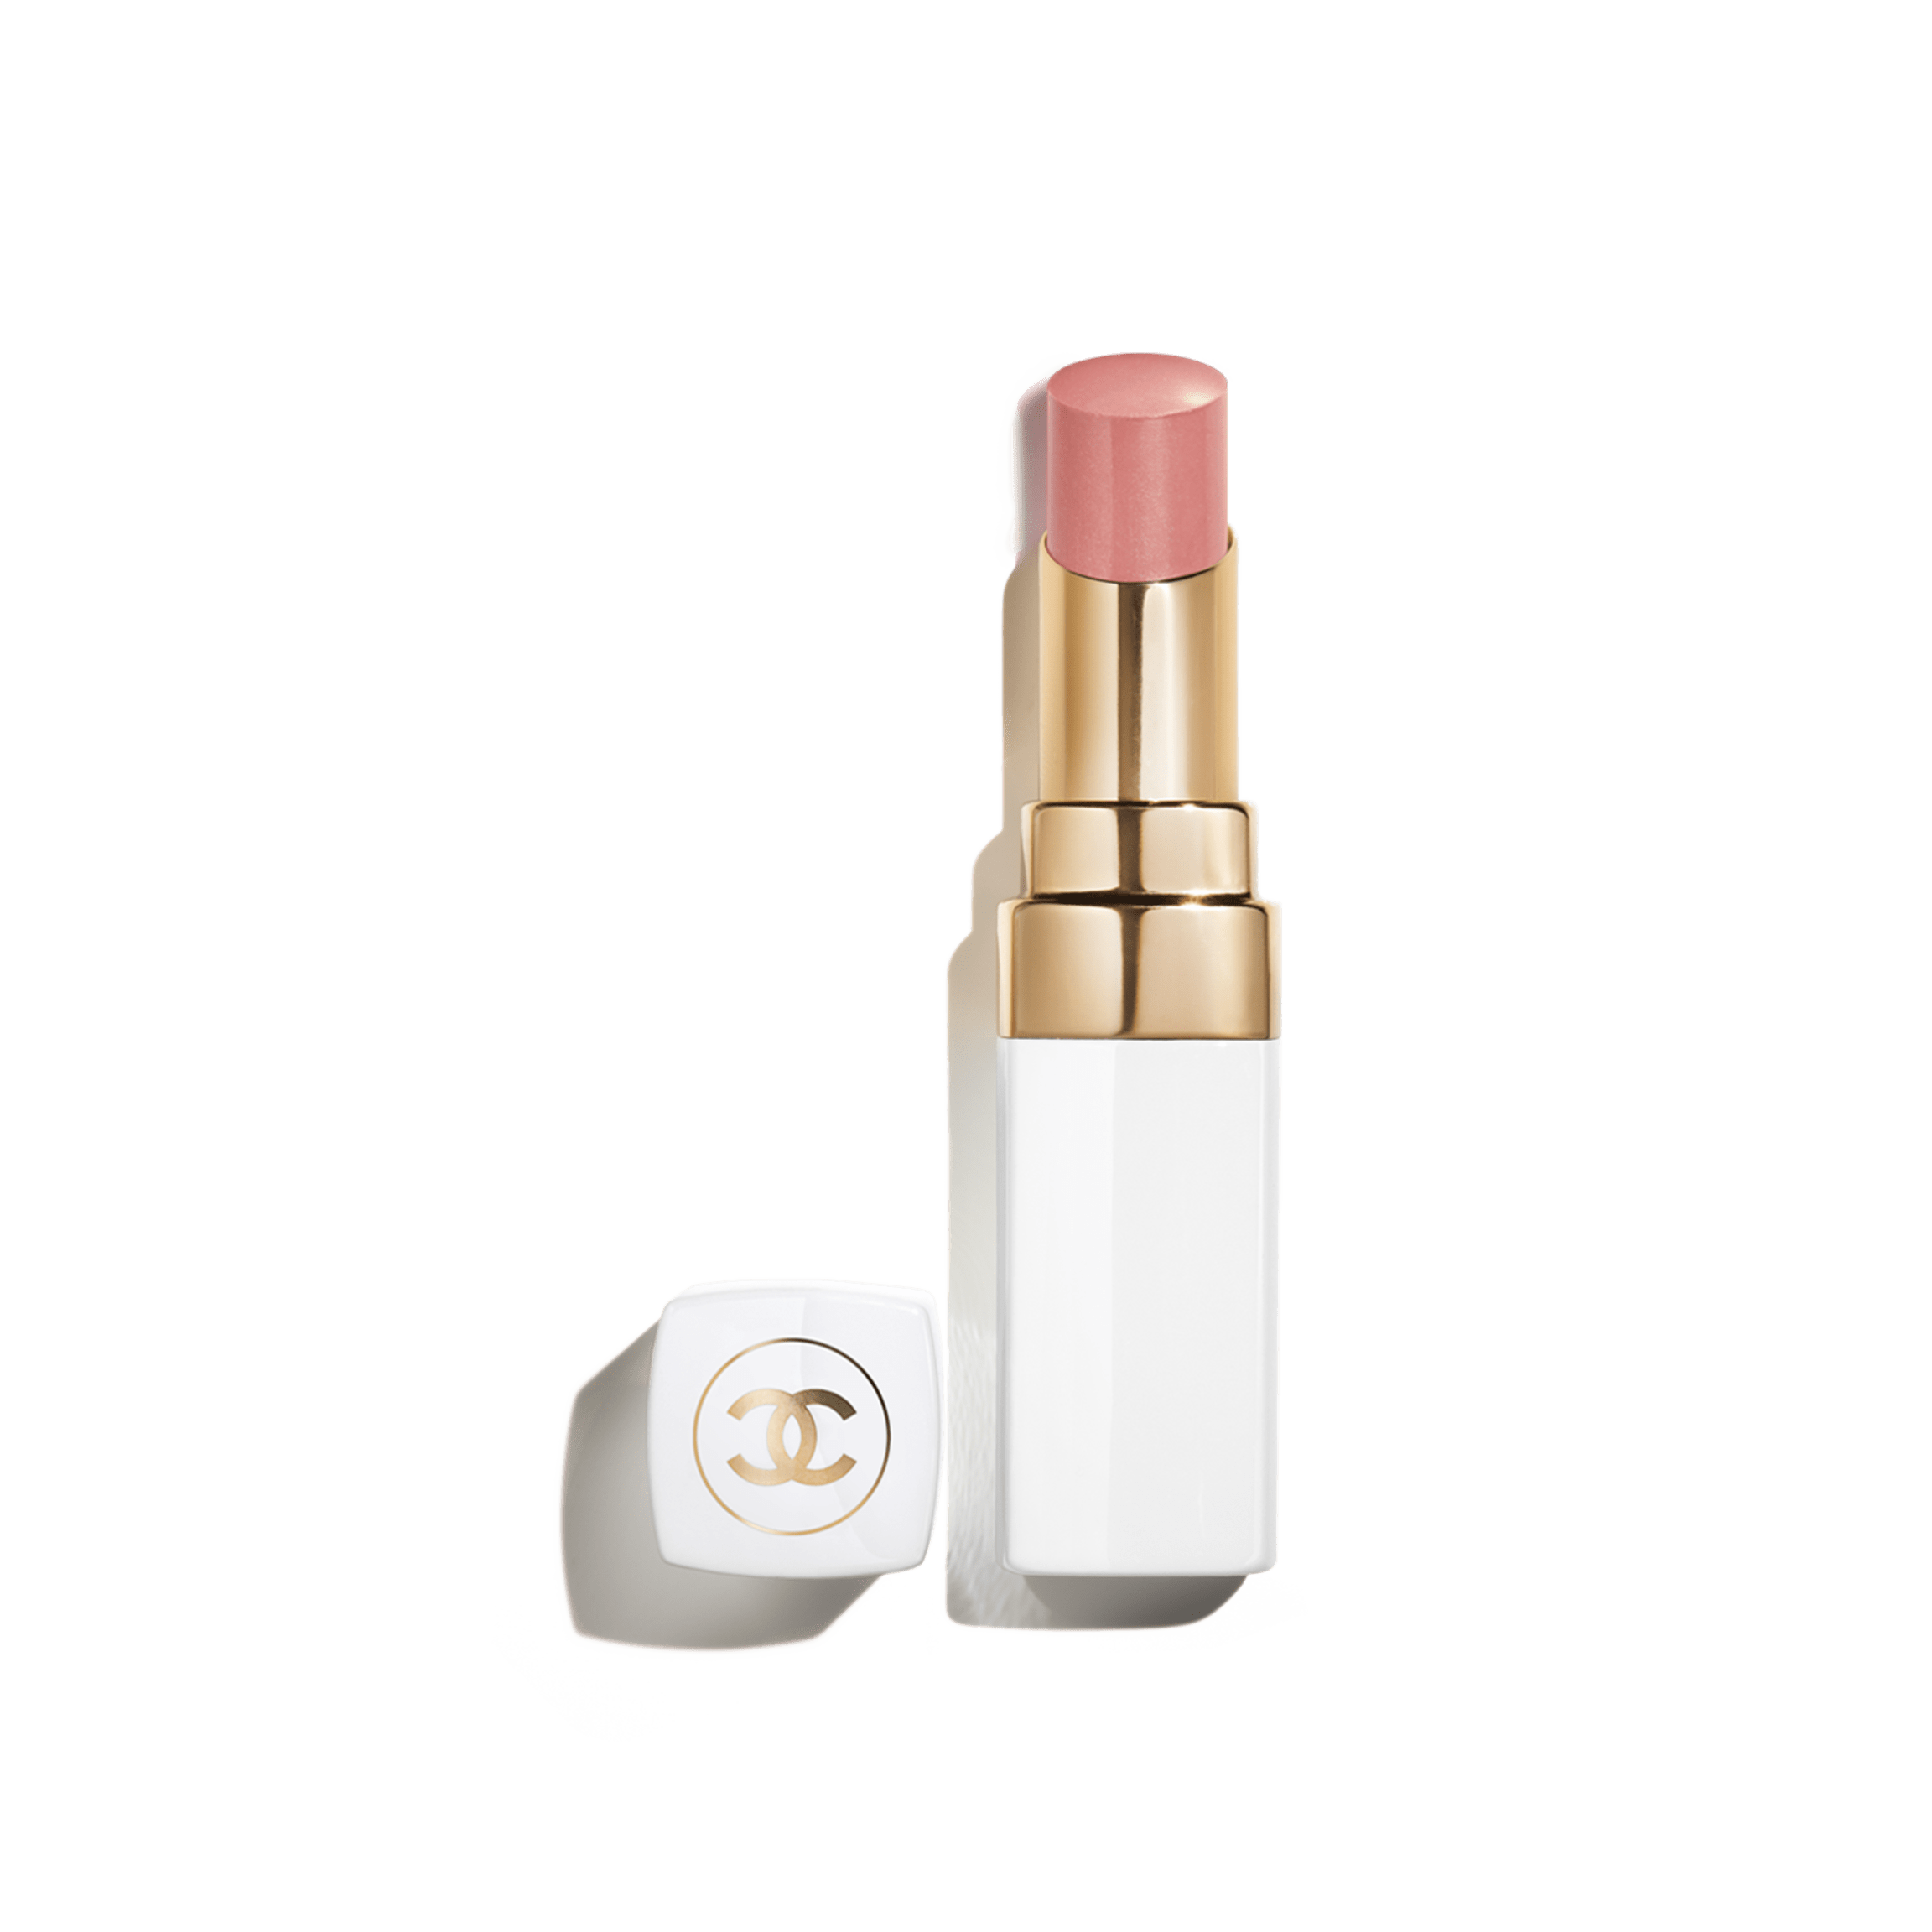 CHANEL ROUGE COCO BAUME Lip Balm, Nordstrom